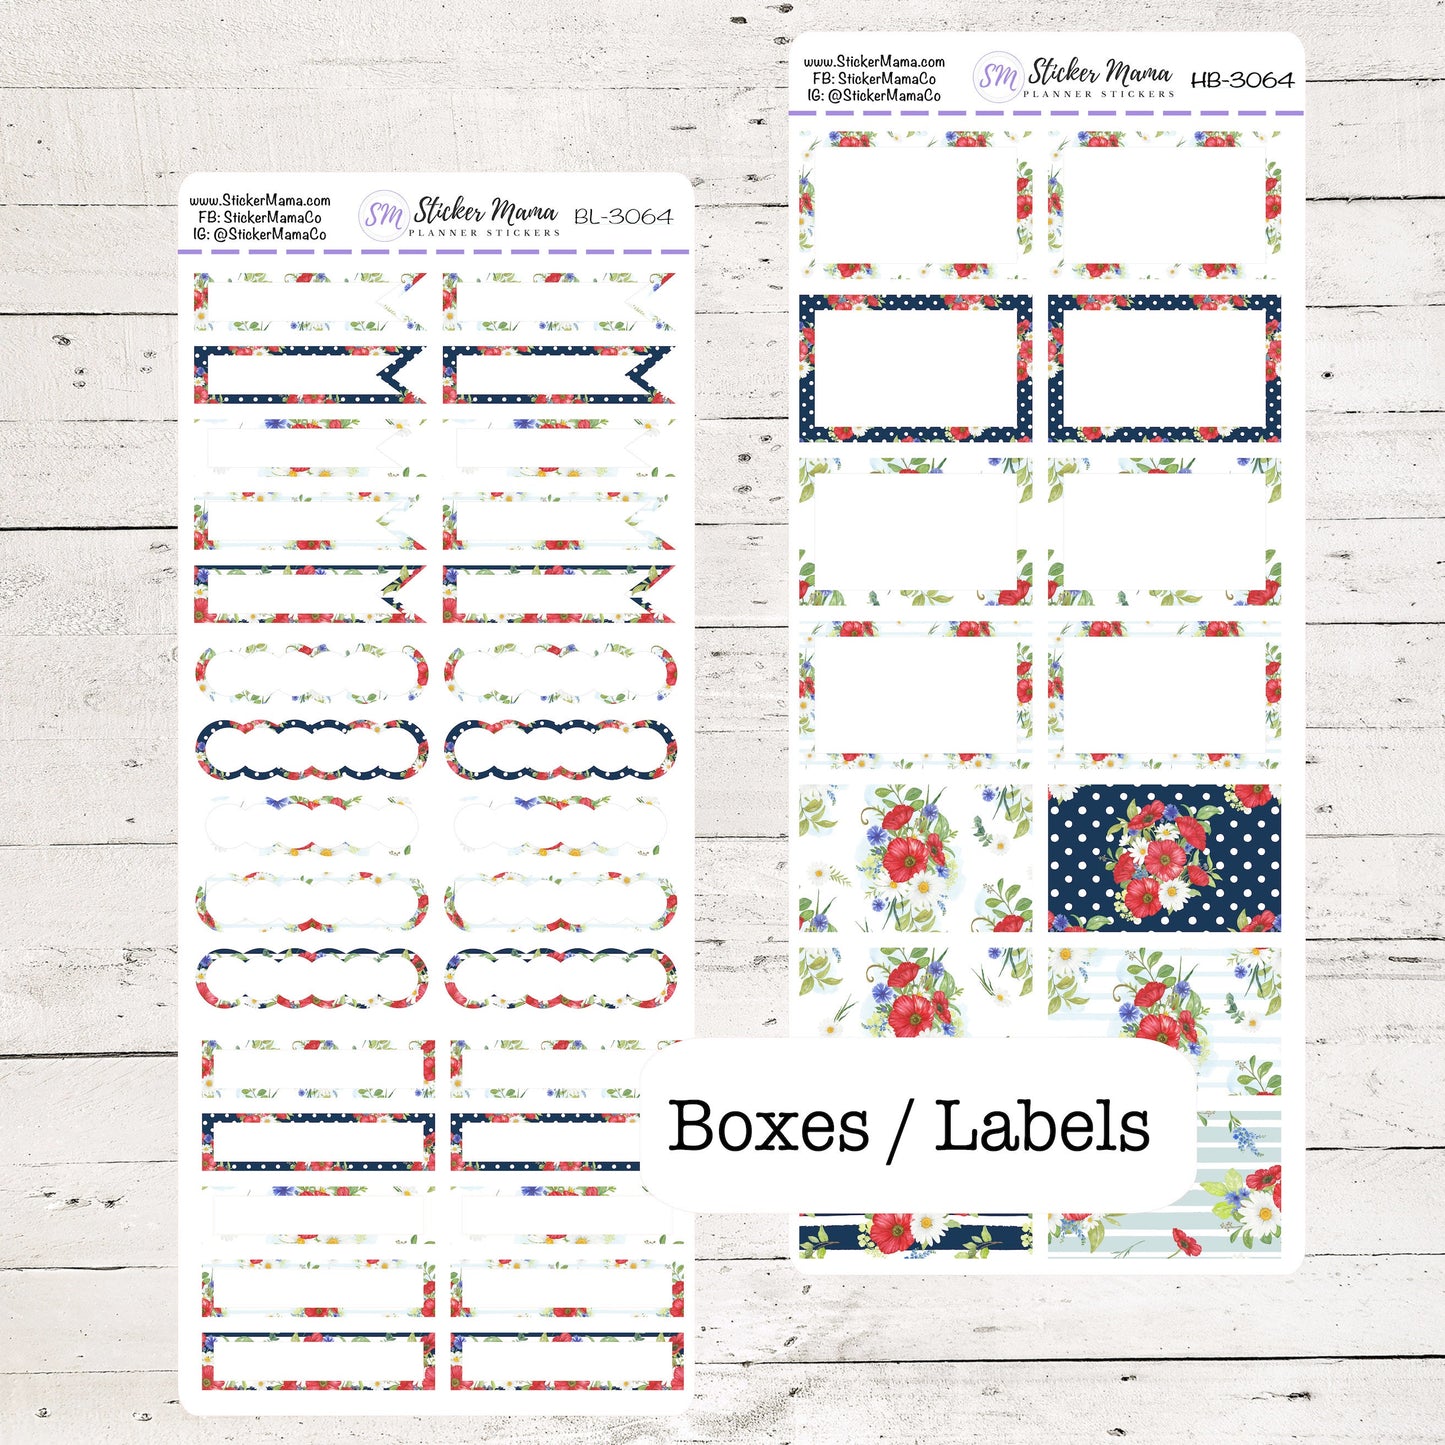 BL-3064 - HB-3064 BASIC Label Stickers - Poppies - Half Boxes - Planner Stickers - Full Box for Planners